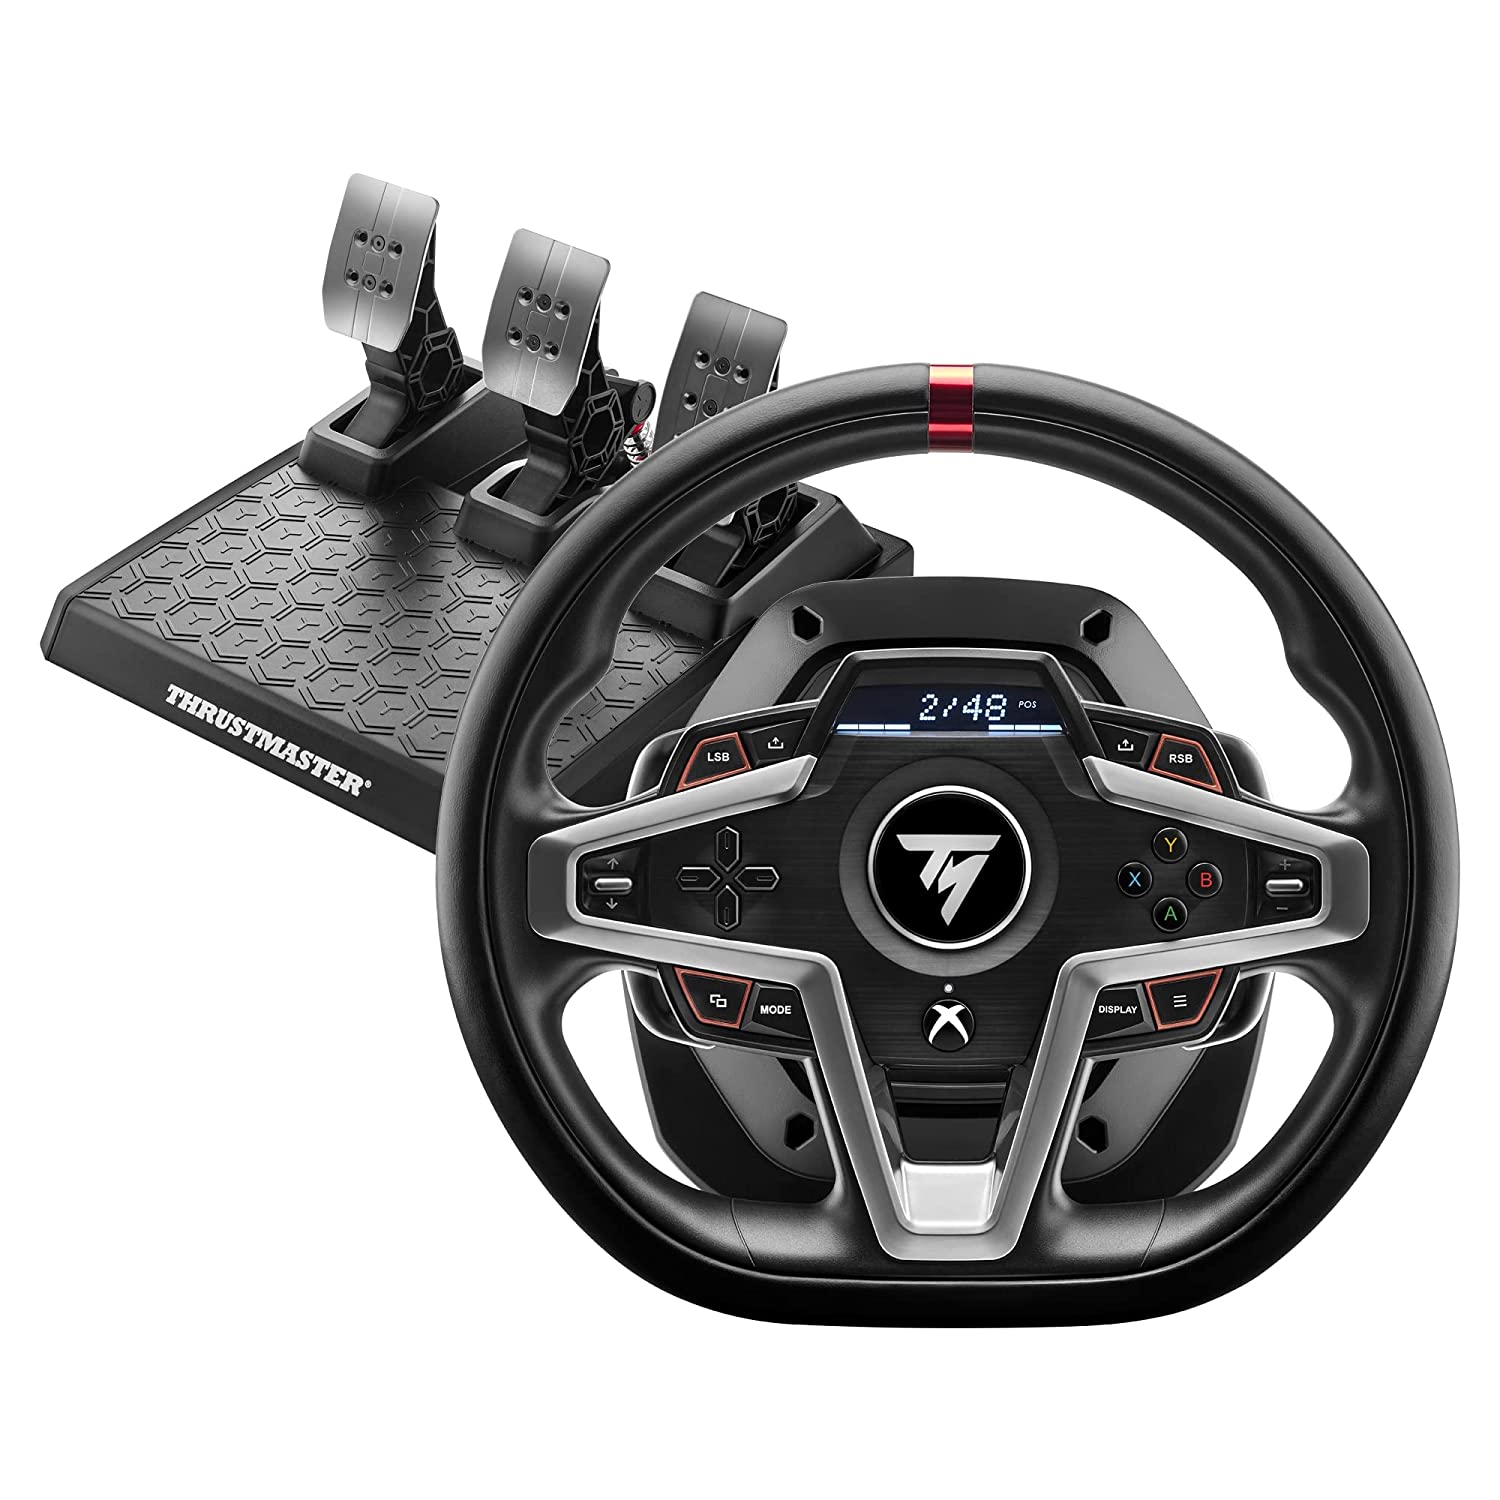 Thrustmaster T248X racing wheel review